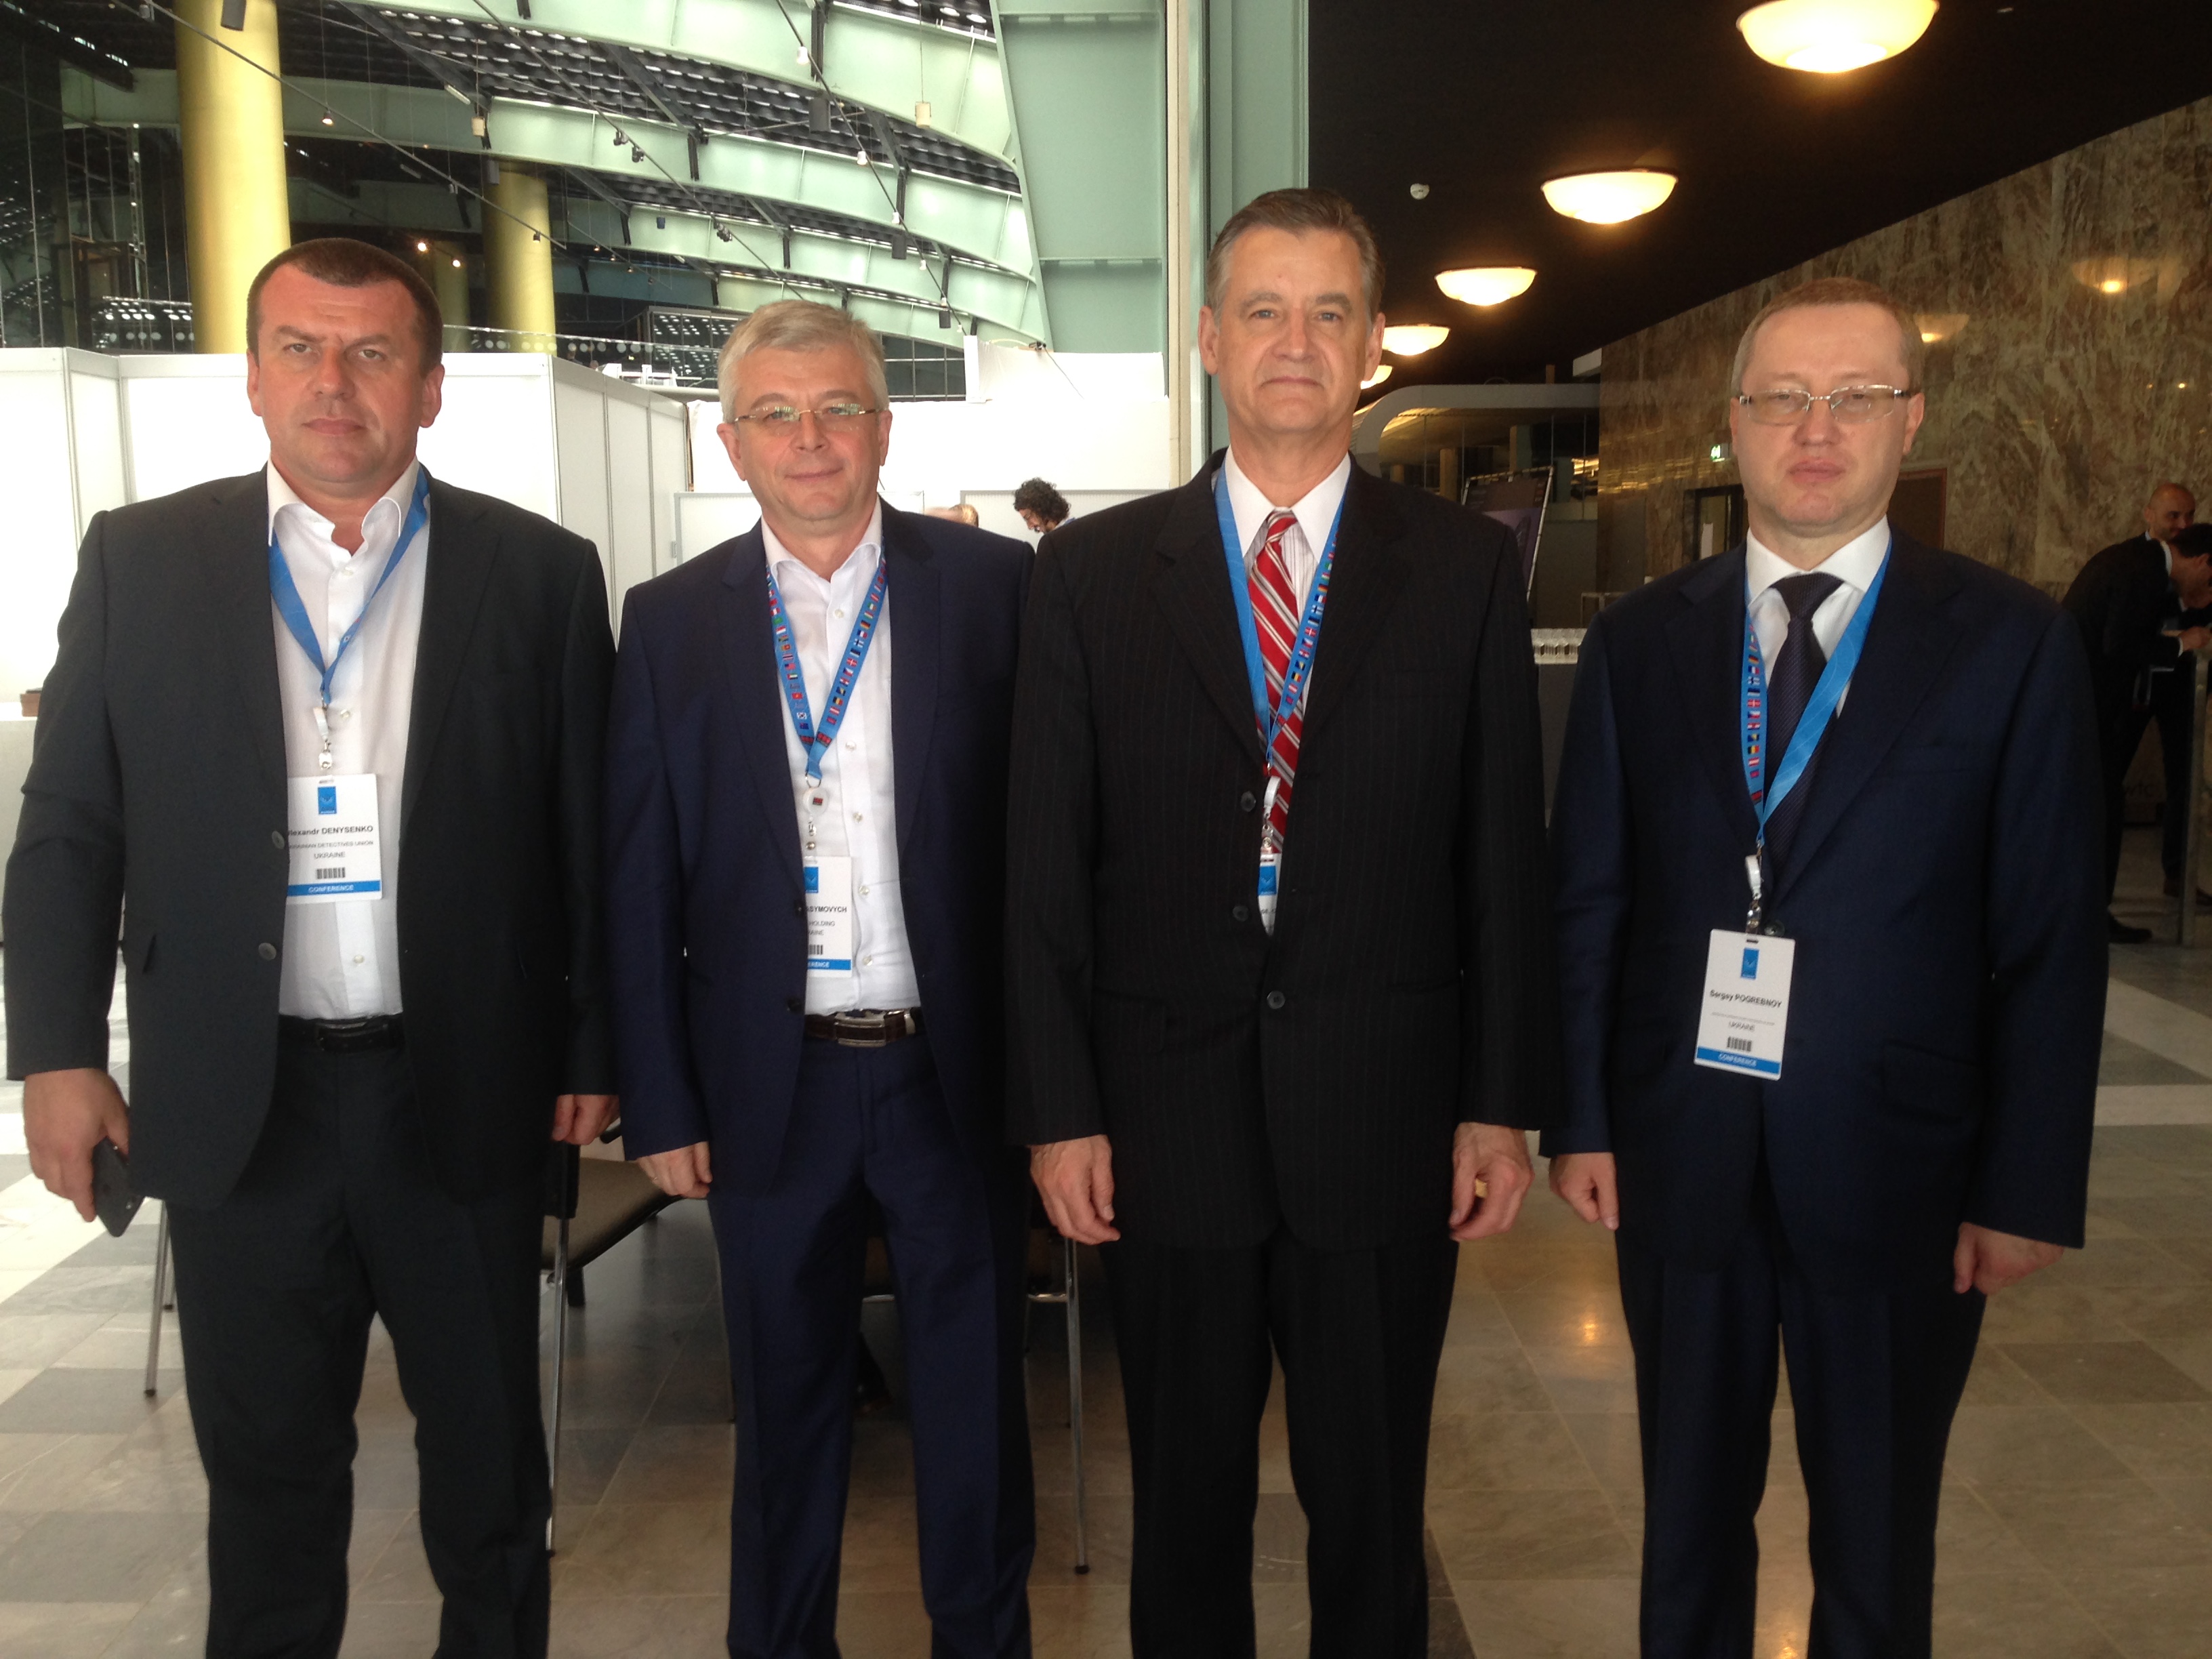 The delegation of ACSP took part at ASIS Europe 2018 International conference